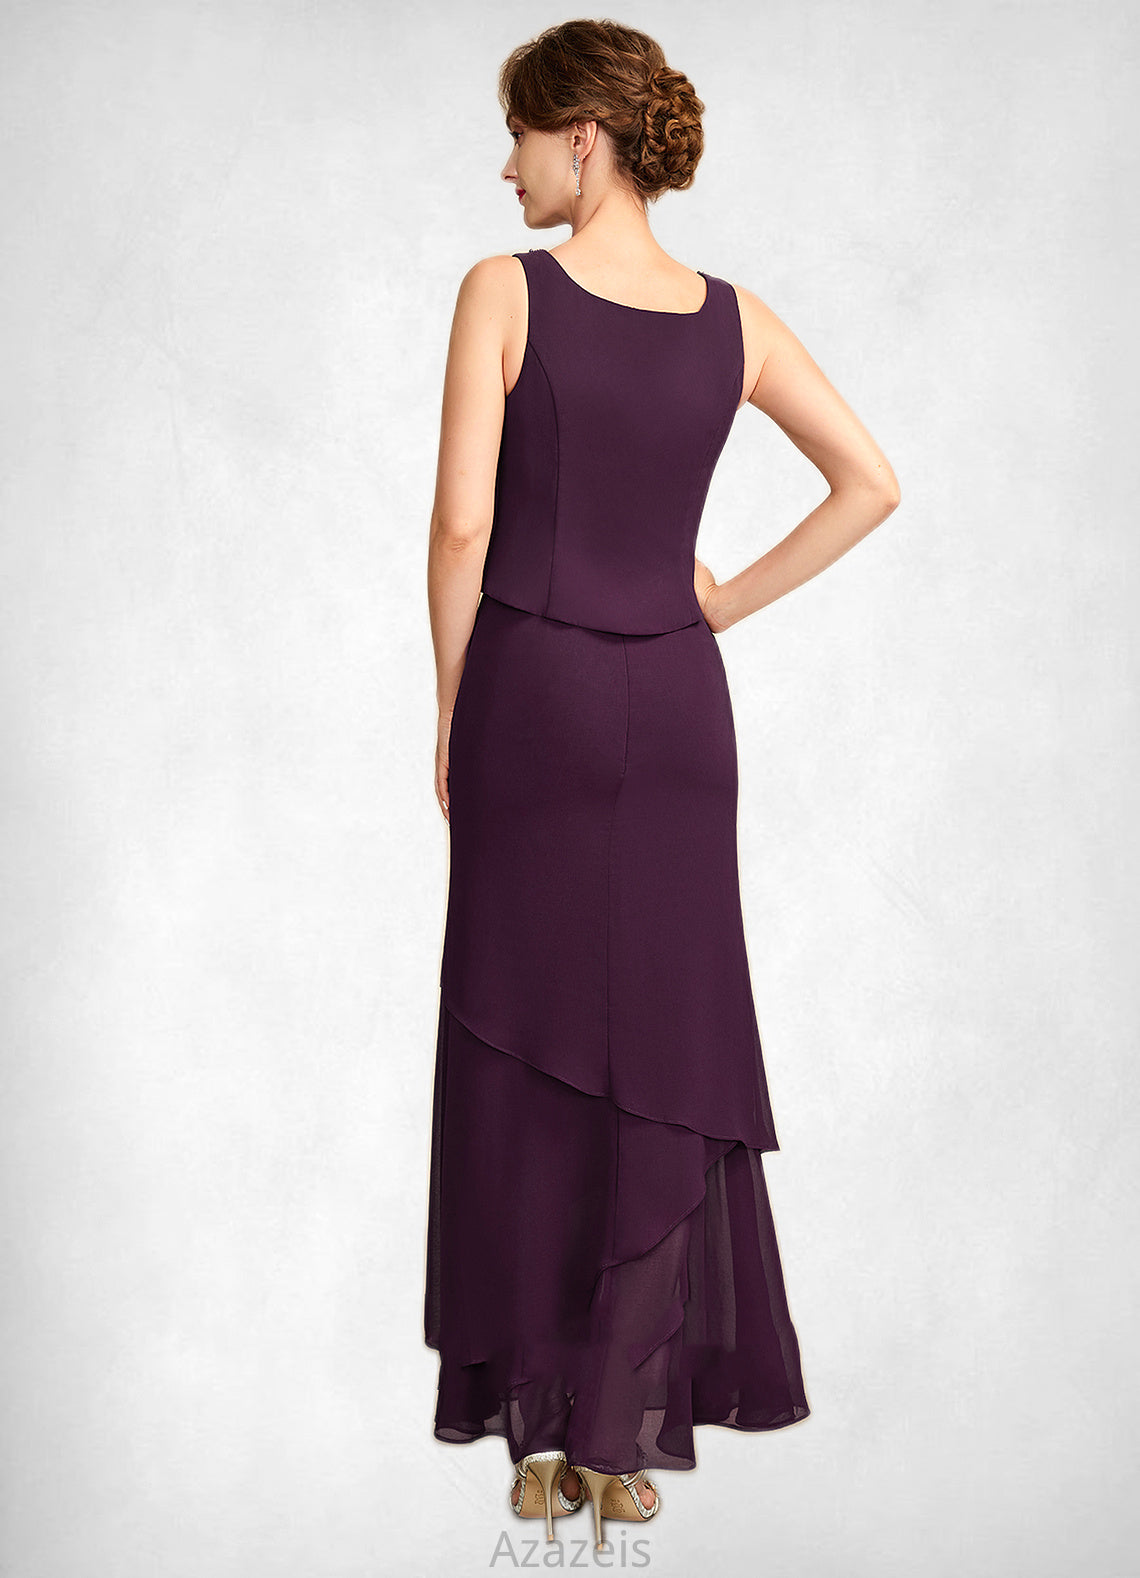 Sadie Sheath/Column Scoop Neck Ankle-Length Chiffon Mother of the Bride Dress With Beading Sequins DF126P0015024